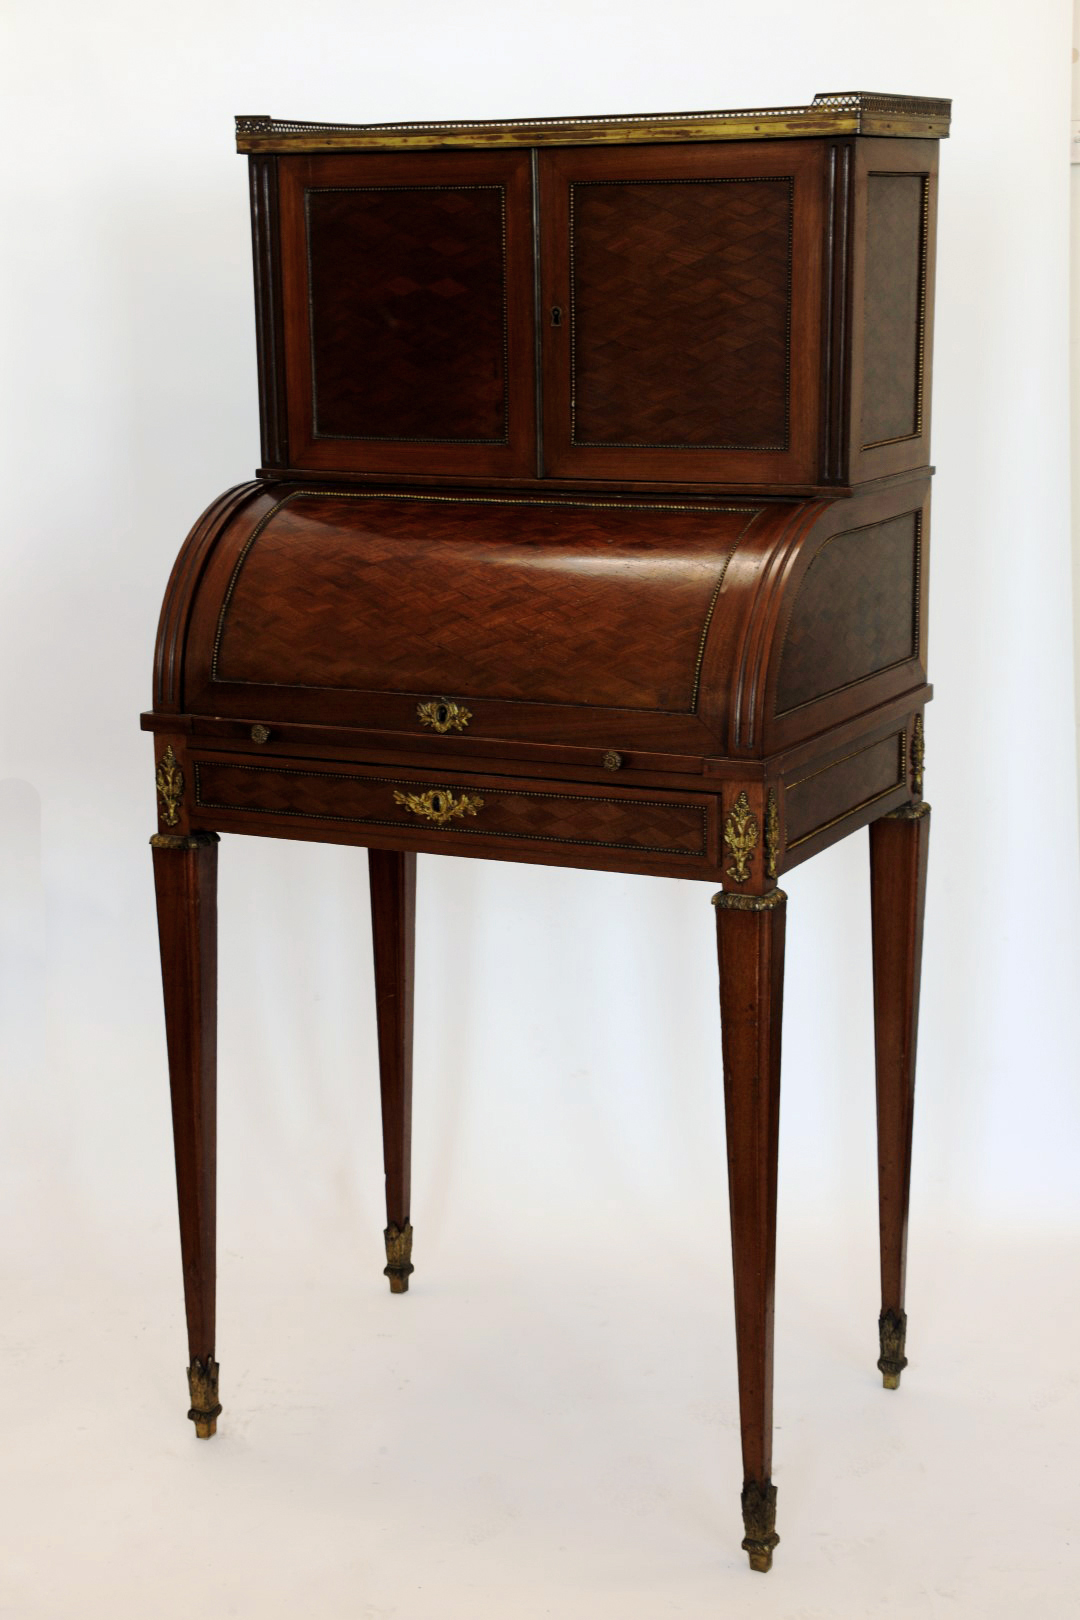 A 19th century French parquetry writing desk with three quarter pierced gallery above two panelled